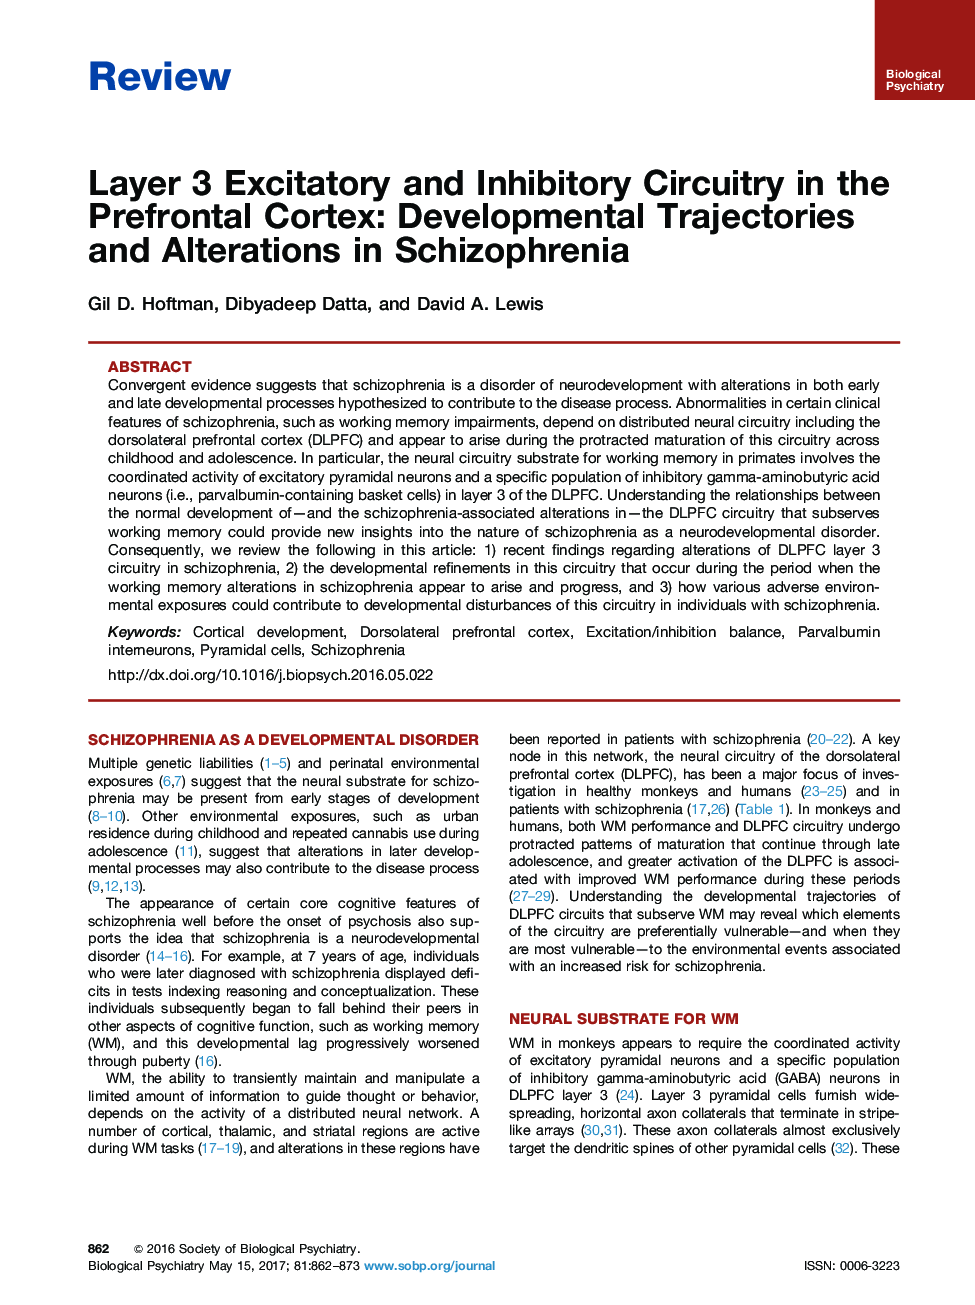 ReviewLayer 3 Excitatory and Inhibitory Circuitry in the Prefrontal Cortex: Developmental Trajectories and Alterations in Schizophrenia